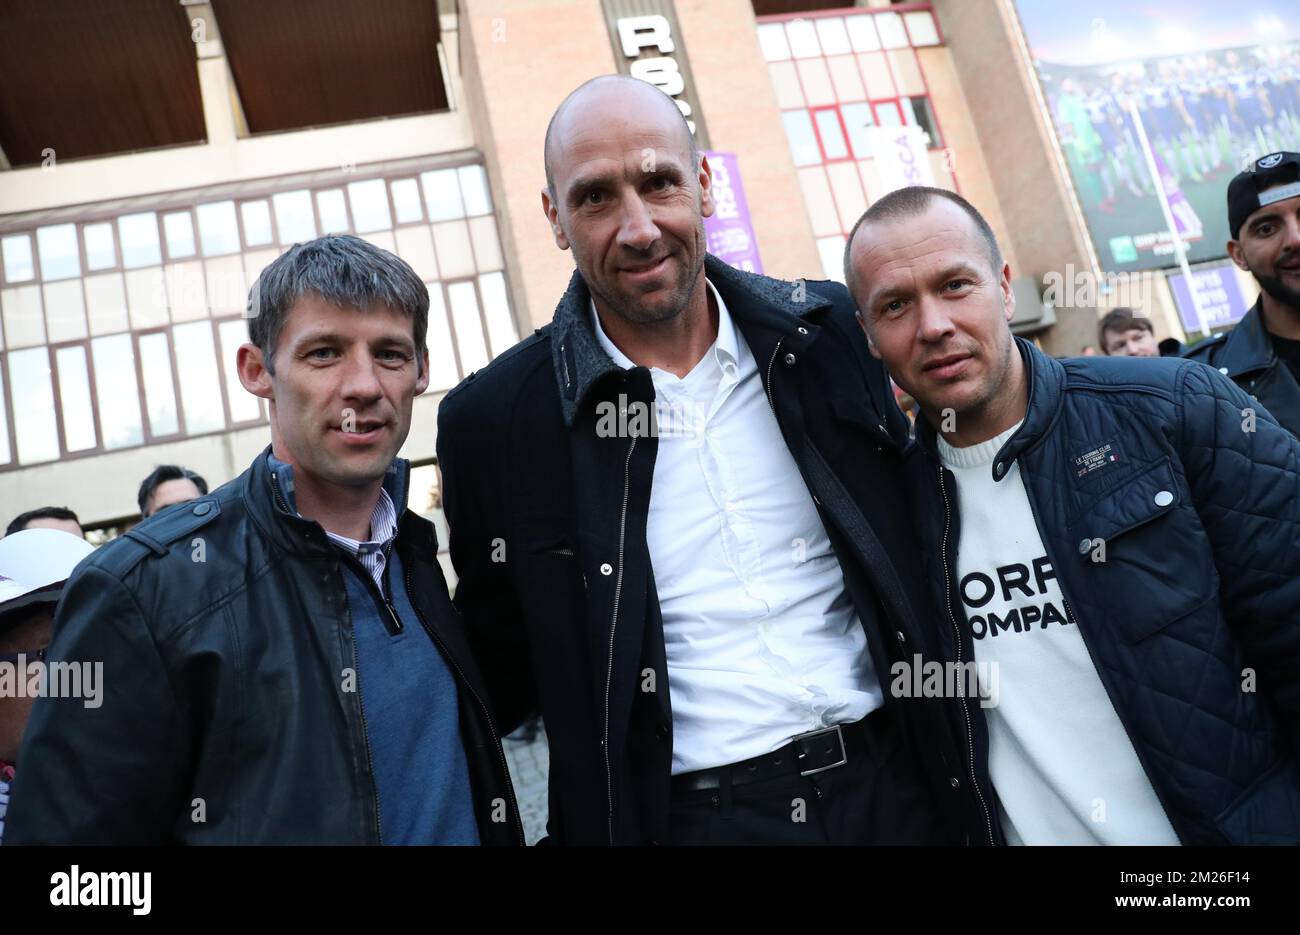 Oleg Yashchuk, Jan Koller and Par Zetterberg pictured during a soccer game between Belgian team RSC Anderlecht and English club Manchester United F.C. in Brussels, Thursday 13 April 2017, the first leg of the quarter finals of the Europa League competition. BELGA PHOTO VIRGINIE LEFOUR  Stock Photo